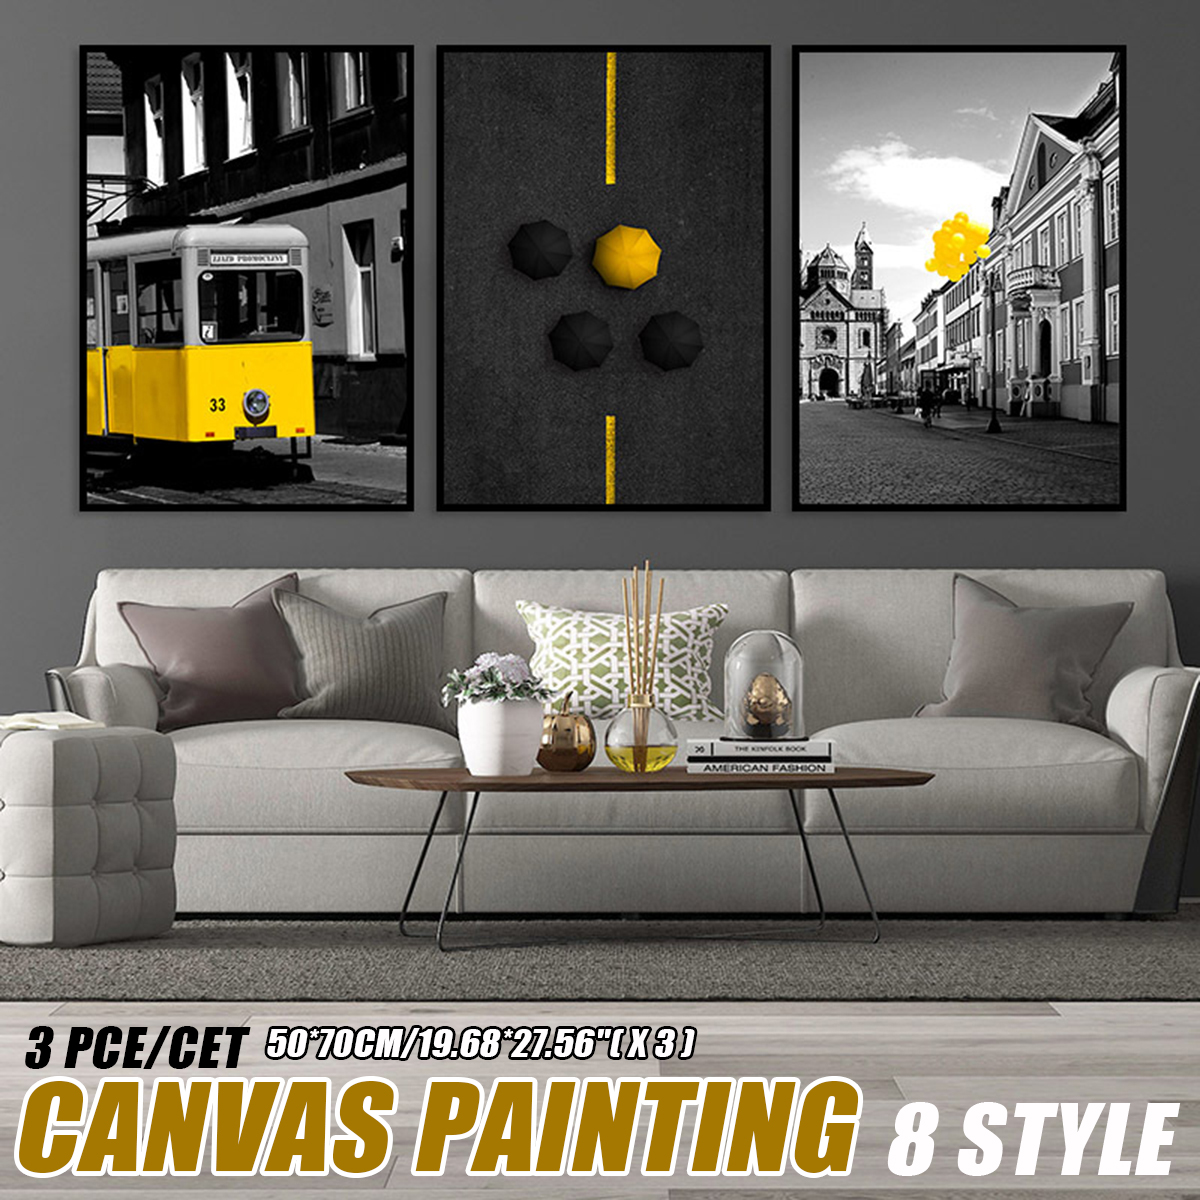 3Pcs-City-Scenery-Canvas-Paintings-Wall-Decorative-Print-Art-Pictures-Unframed-Wall-Hanging-Home-Off-1783981-1